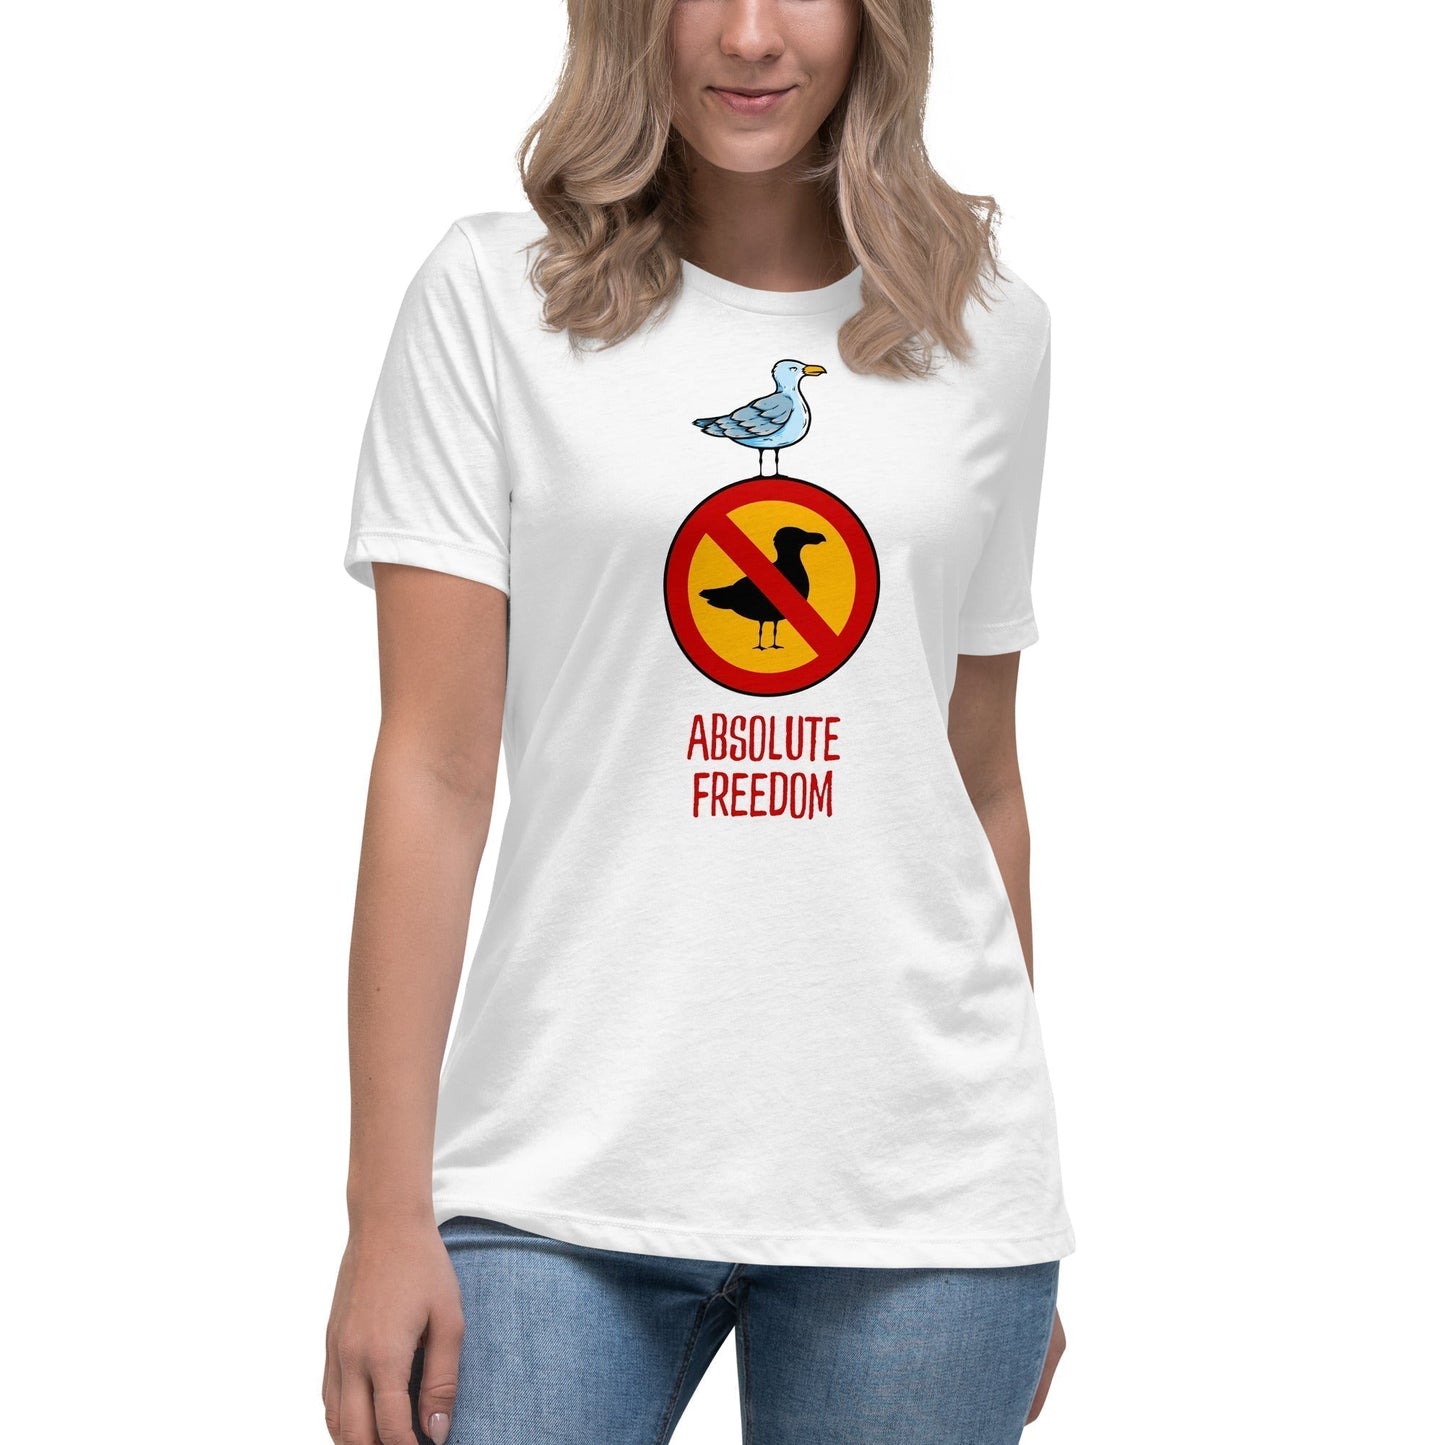 Sartre - Absolute Freedom Seagull - Women's T-Shirt